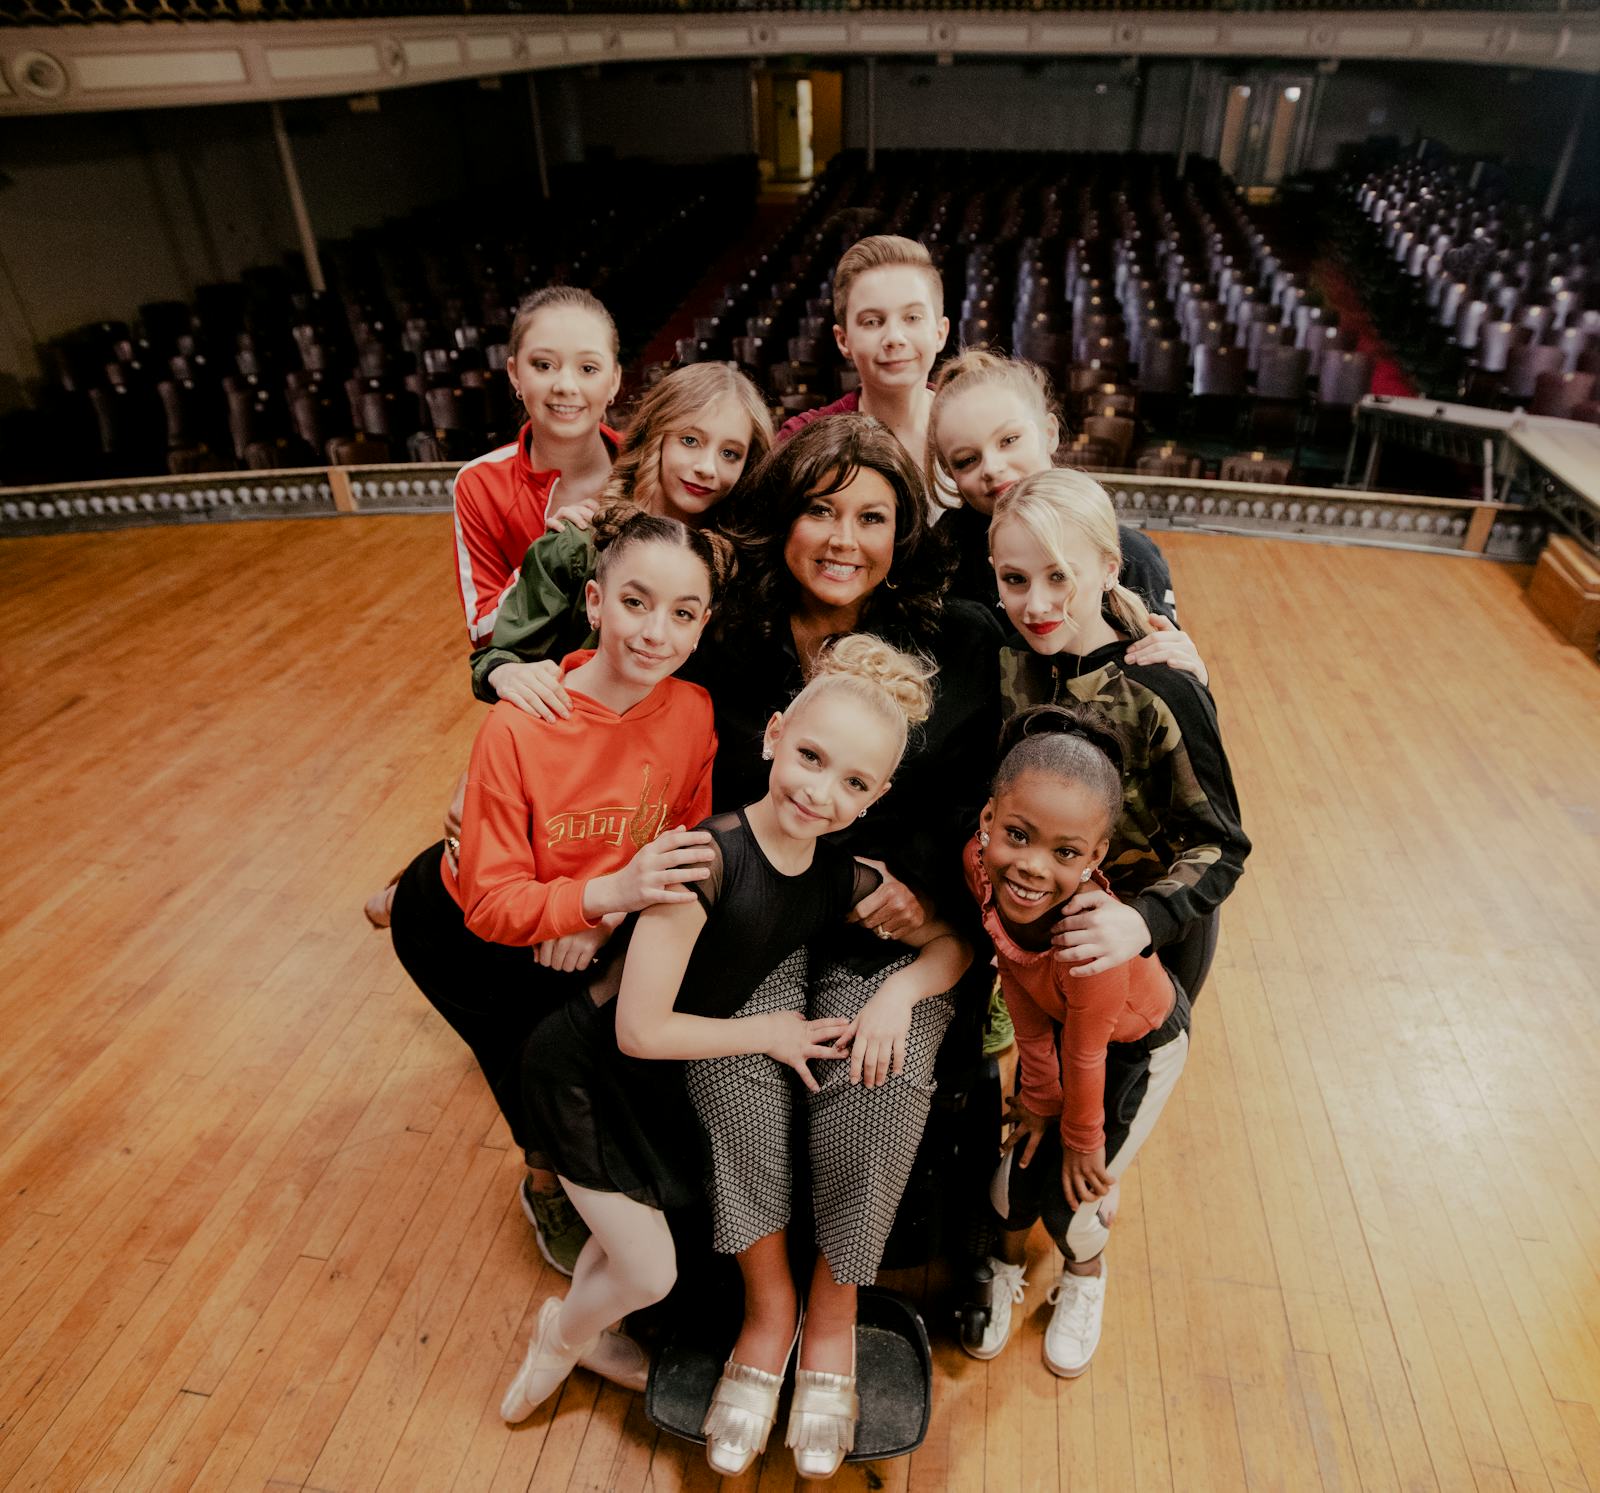 Will 'Dance Moms' Return For Season 9? Here's How To Keep Up With The